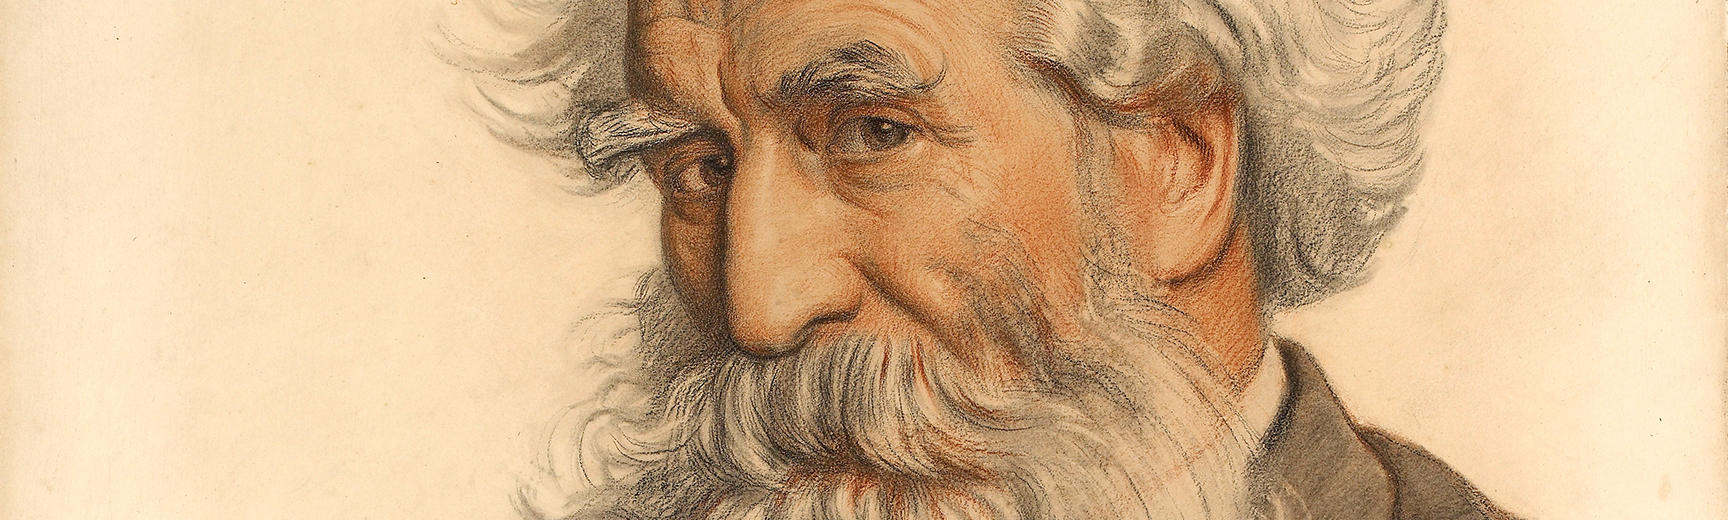 Thomas Combe's intimate and characterul portrait by William Holman Hunt from the Pre-Raphaelites exhibition